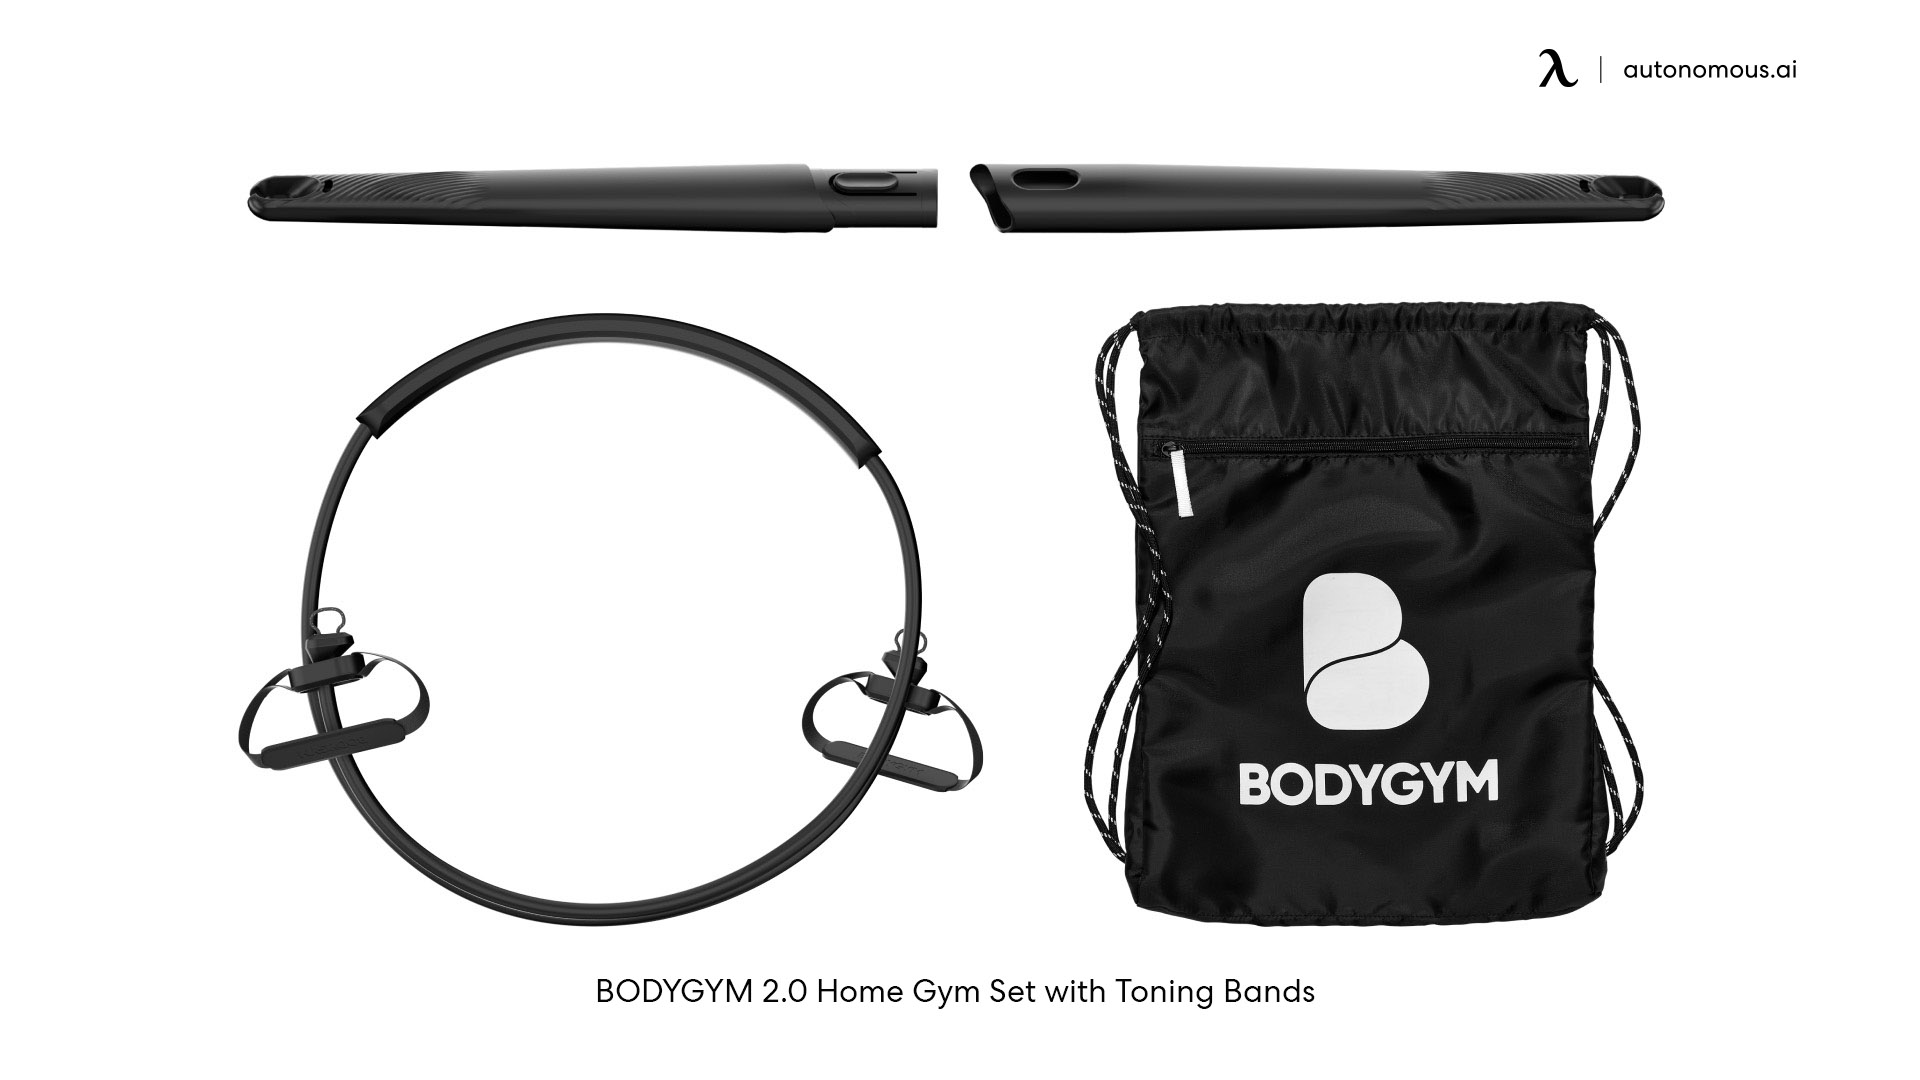 All-In-One Home Gym Workout tools for abs